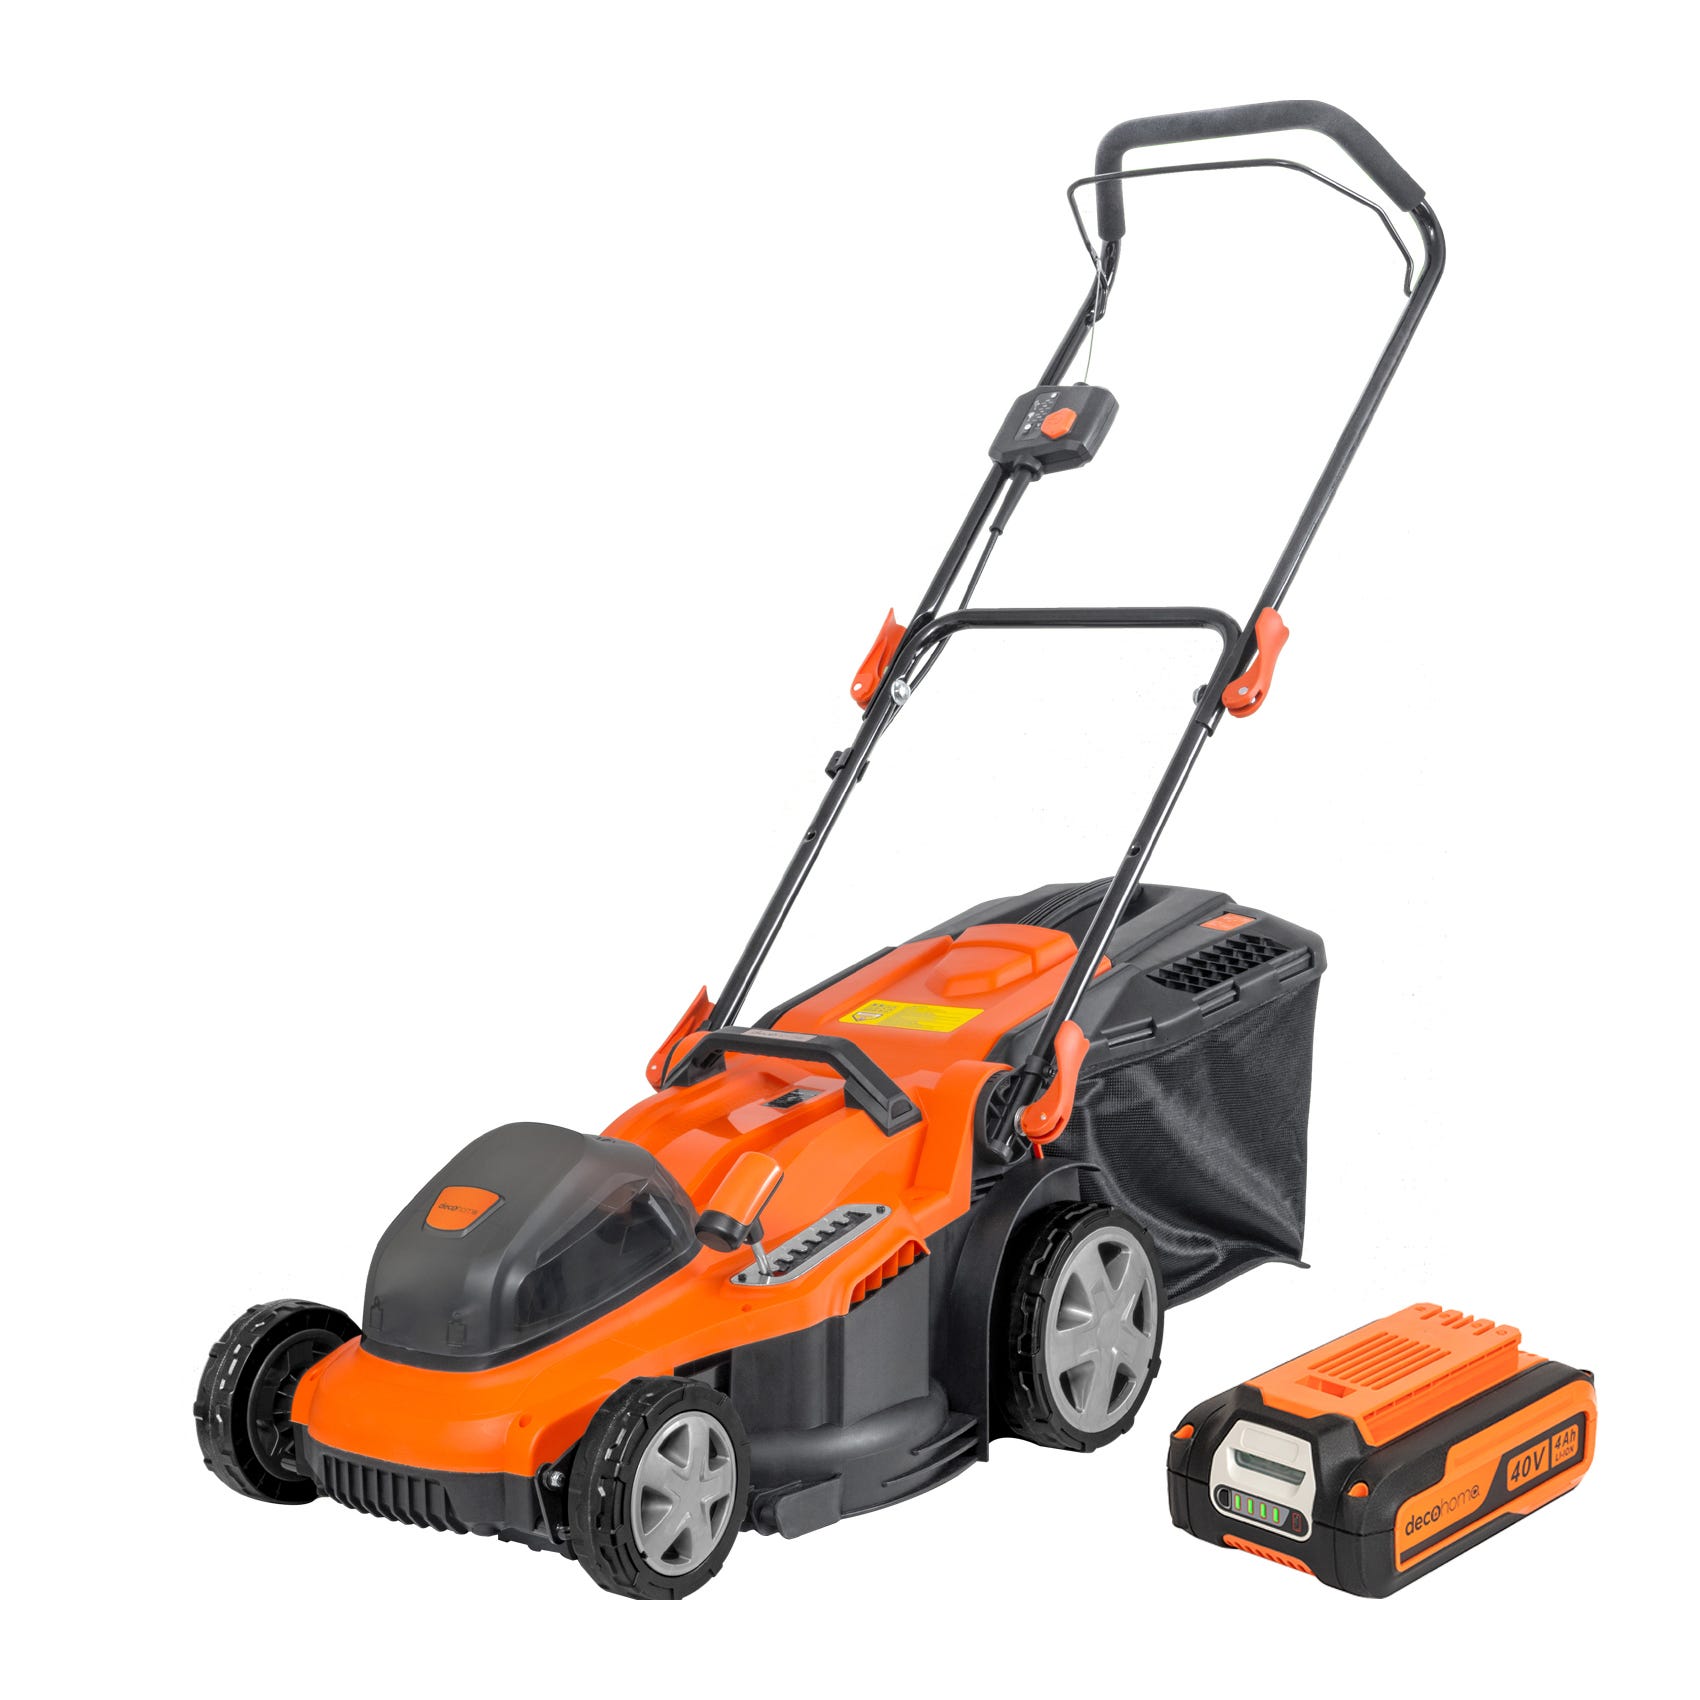 Cordless electric lawn mower with a removable battery pack, featuring an orange and black design.